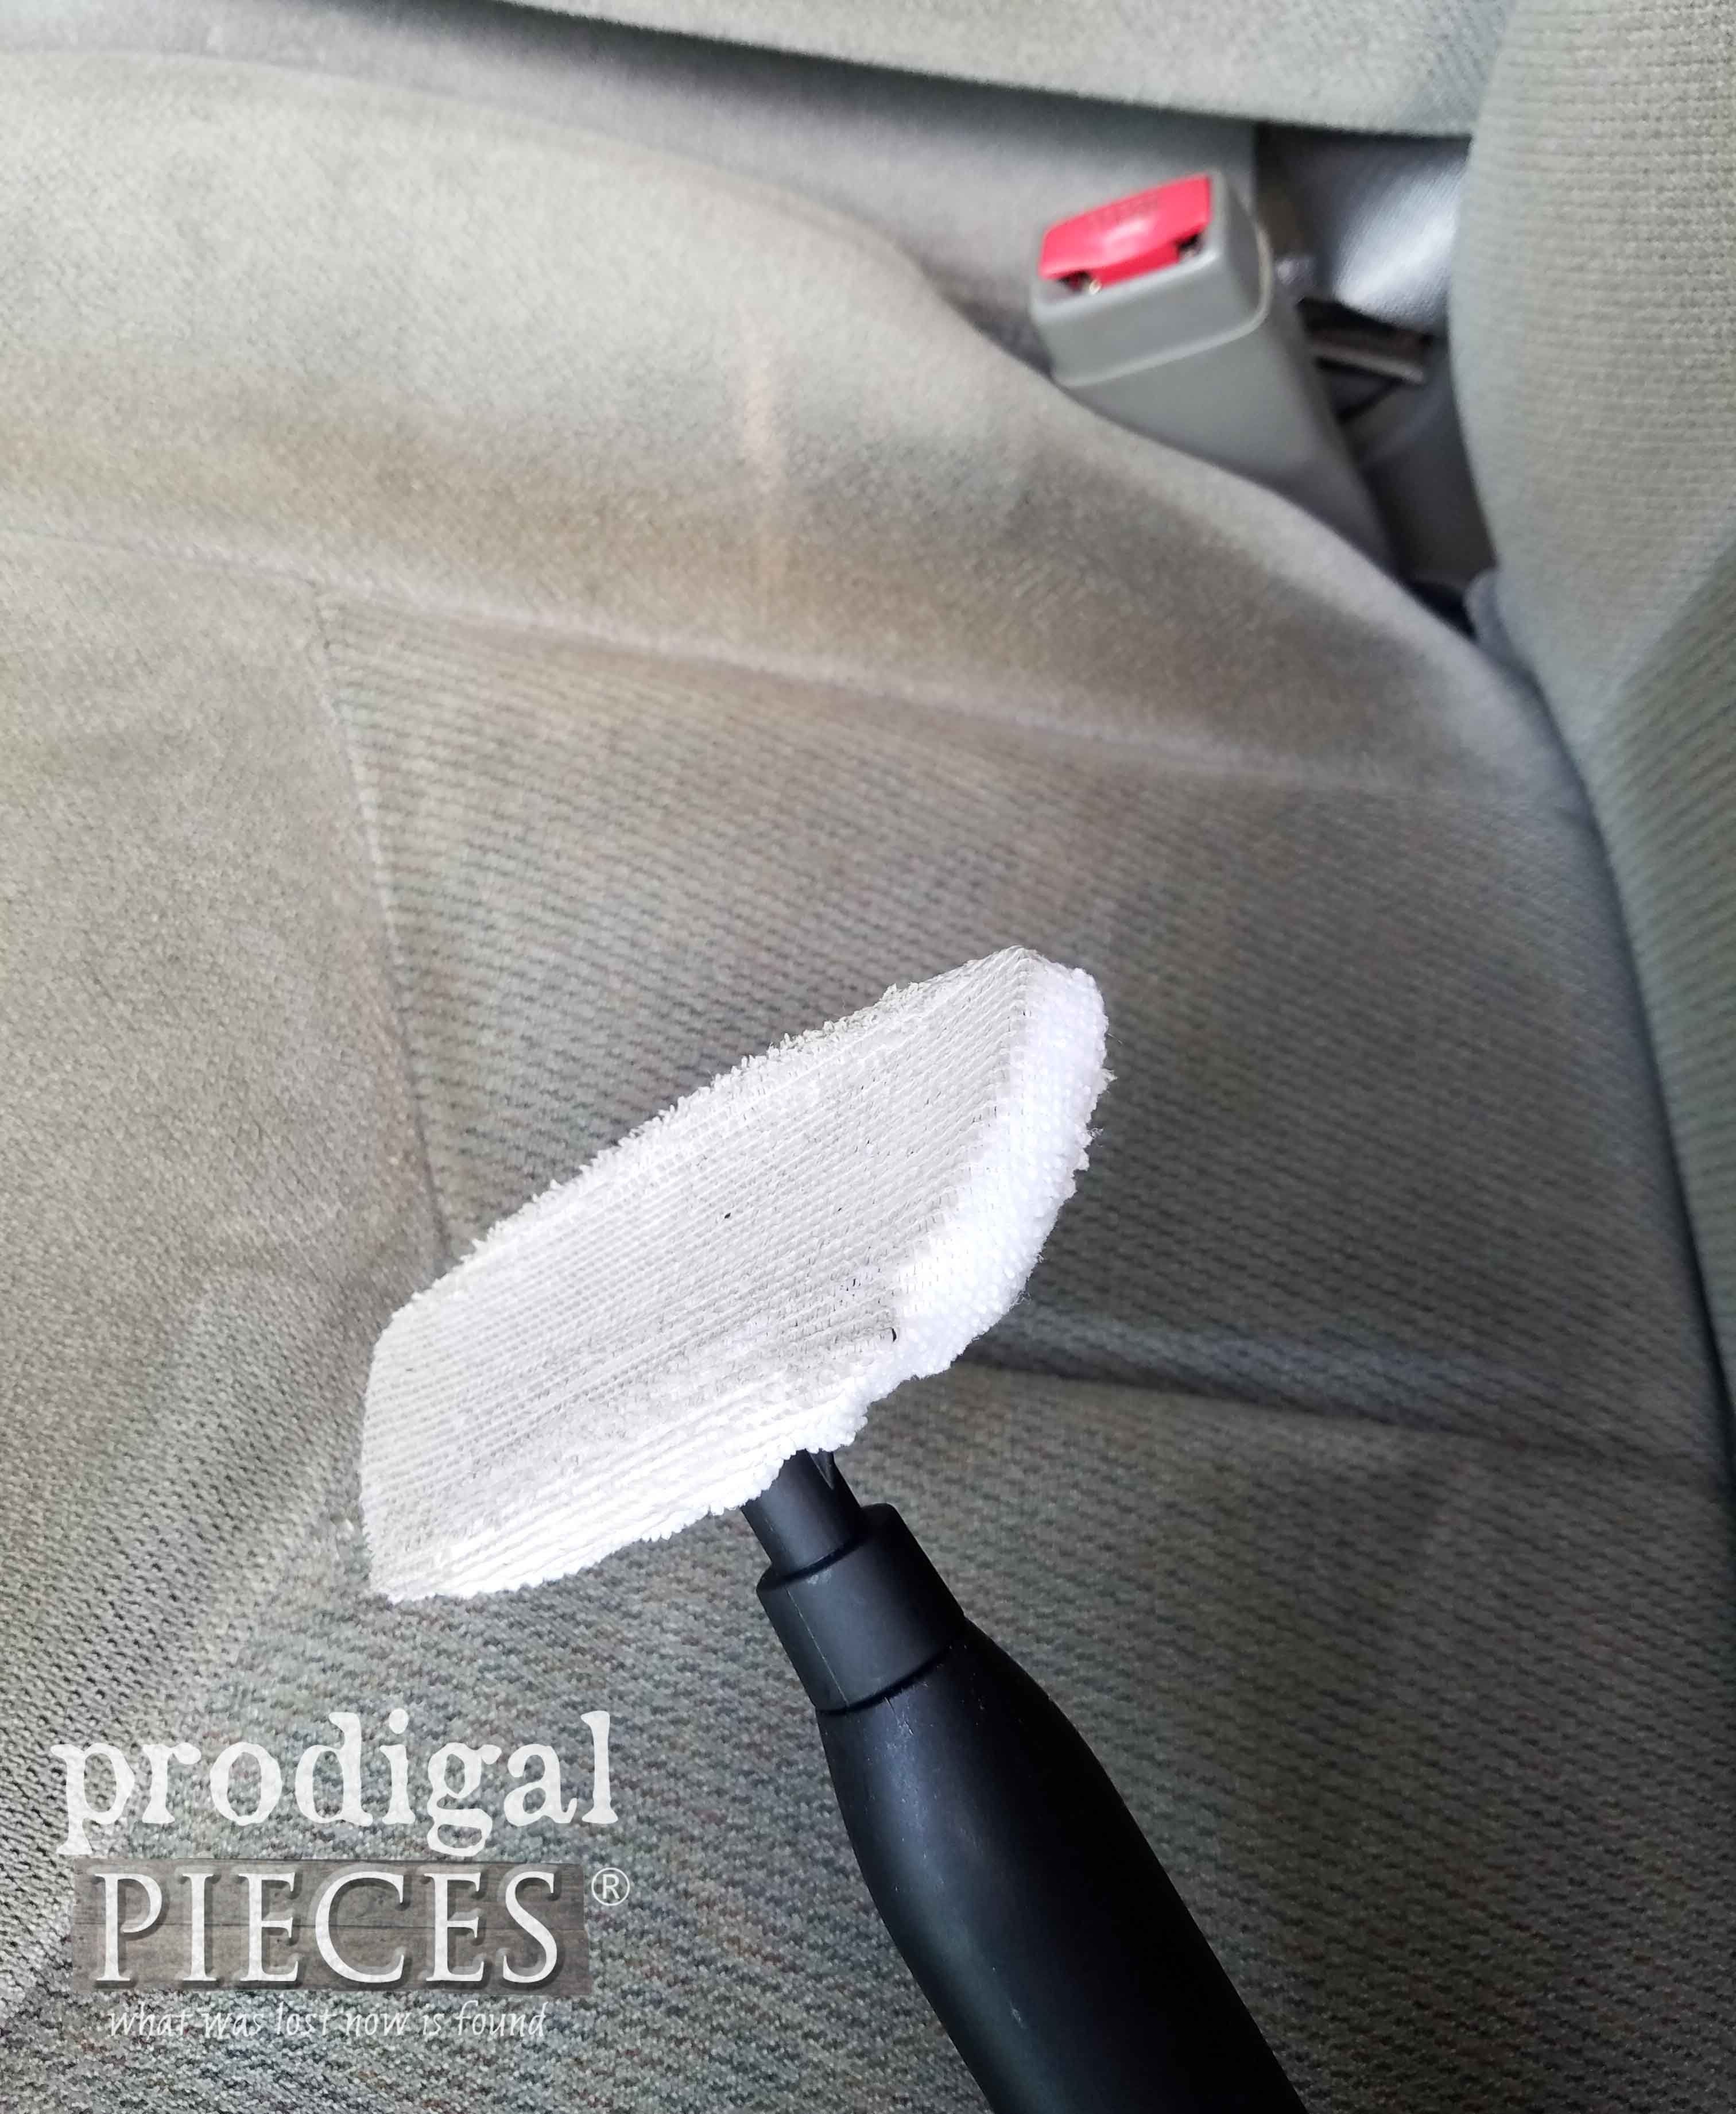 Steam Clean the Dirt out of your vehicle upholstery | prodigalpieces.com